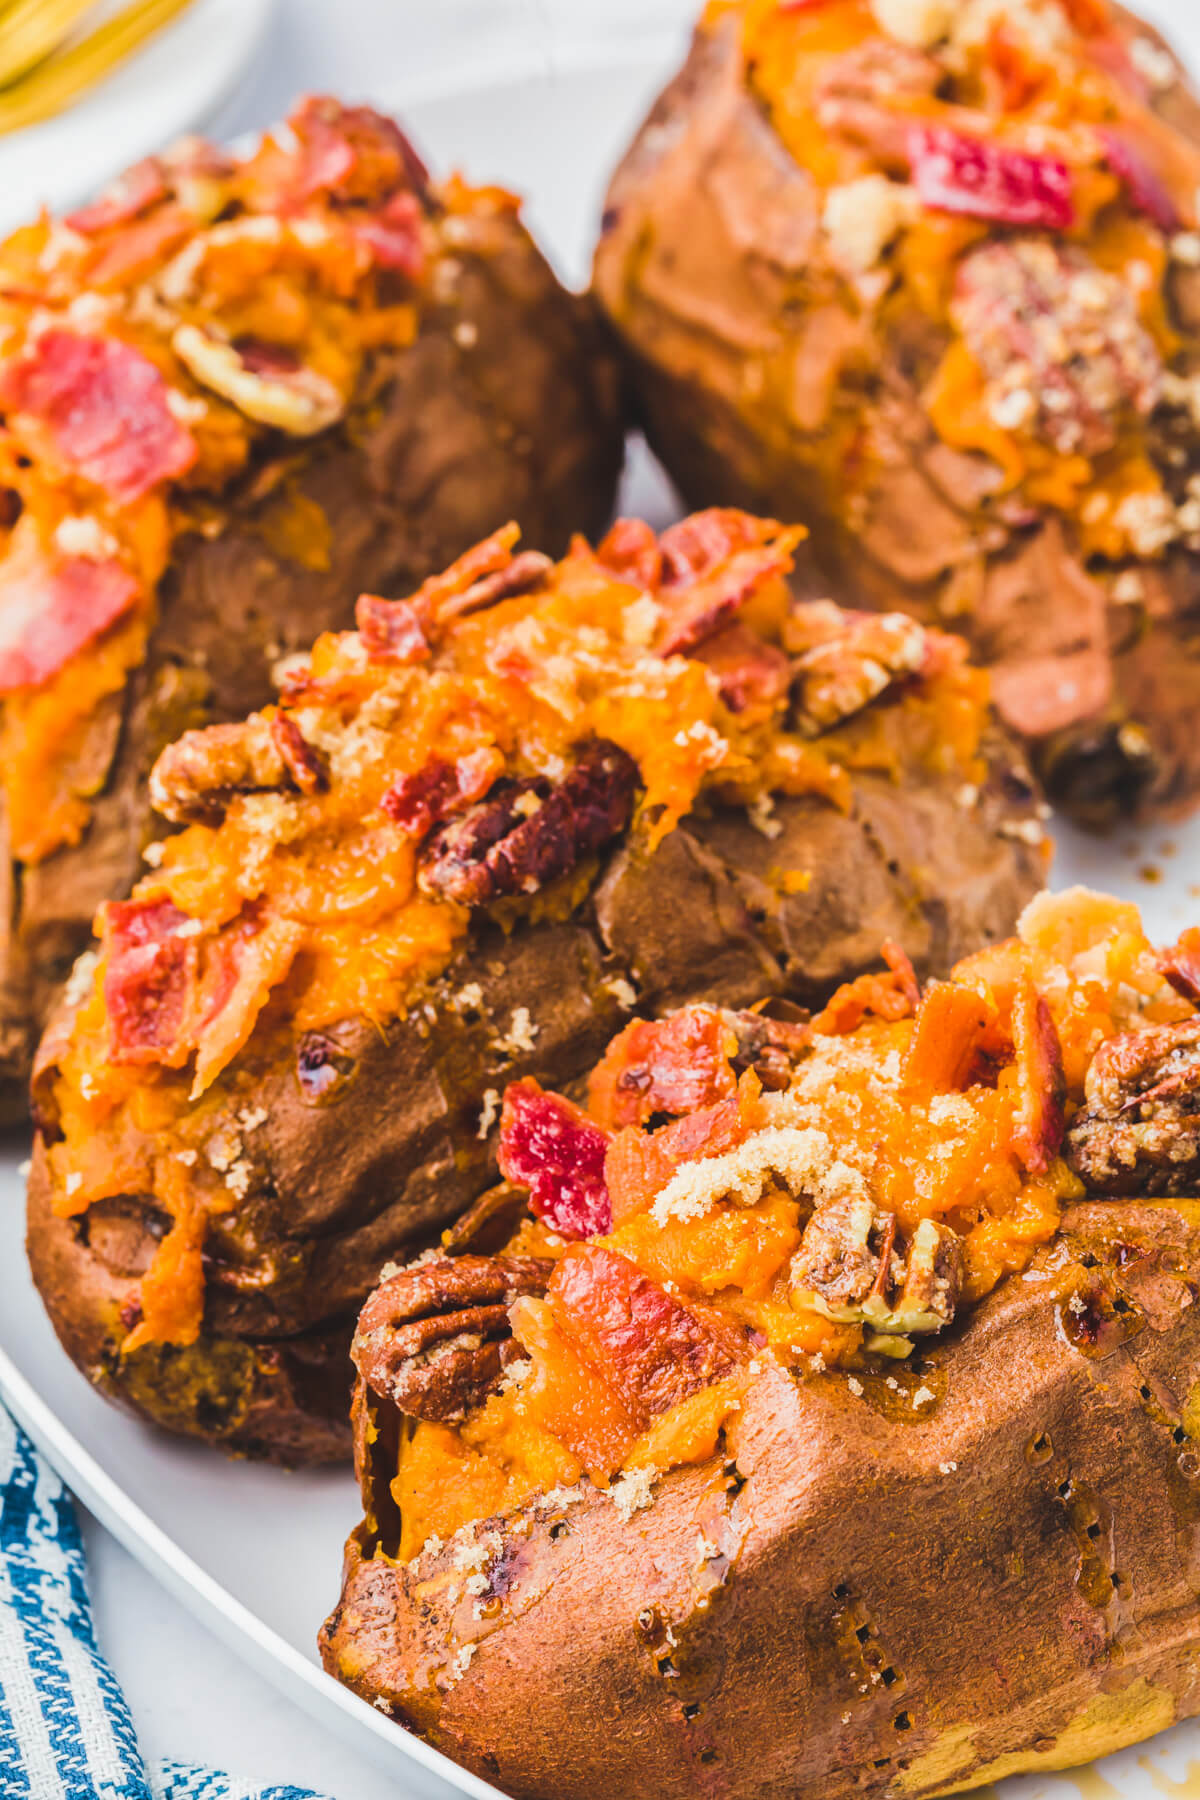 Four Twice Baked Sweet Potatoes topped with crispy bacon and pecans on a white plate.